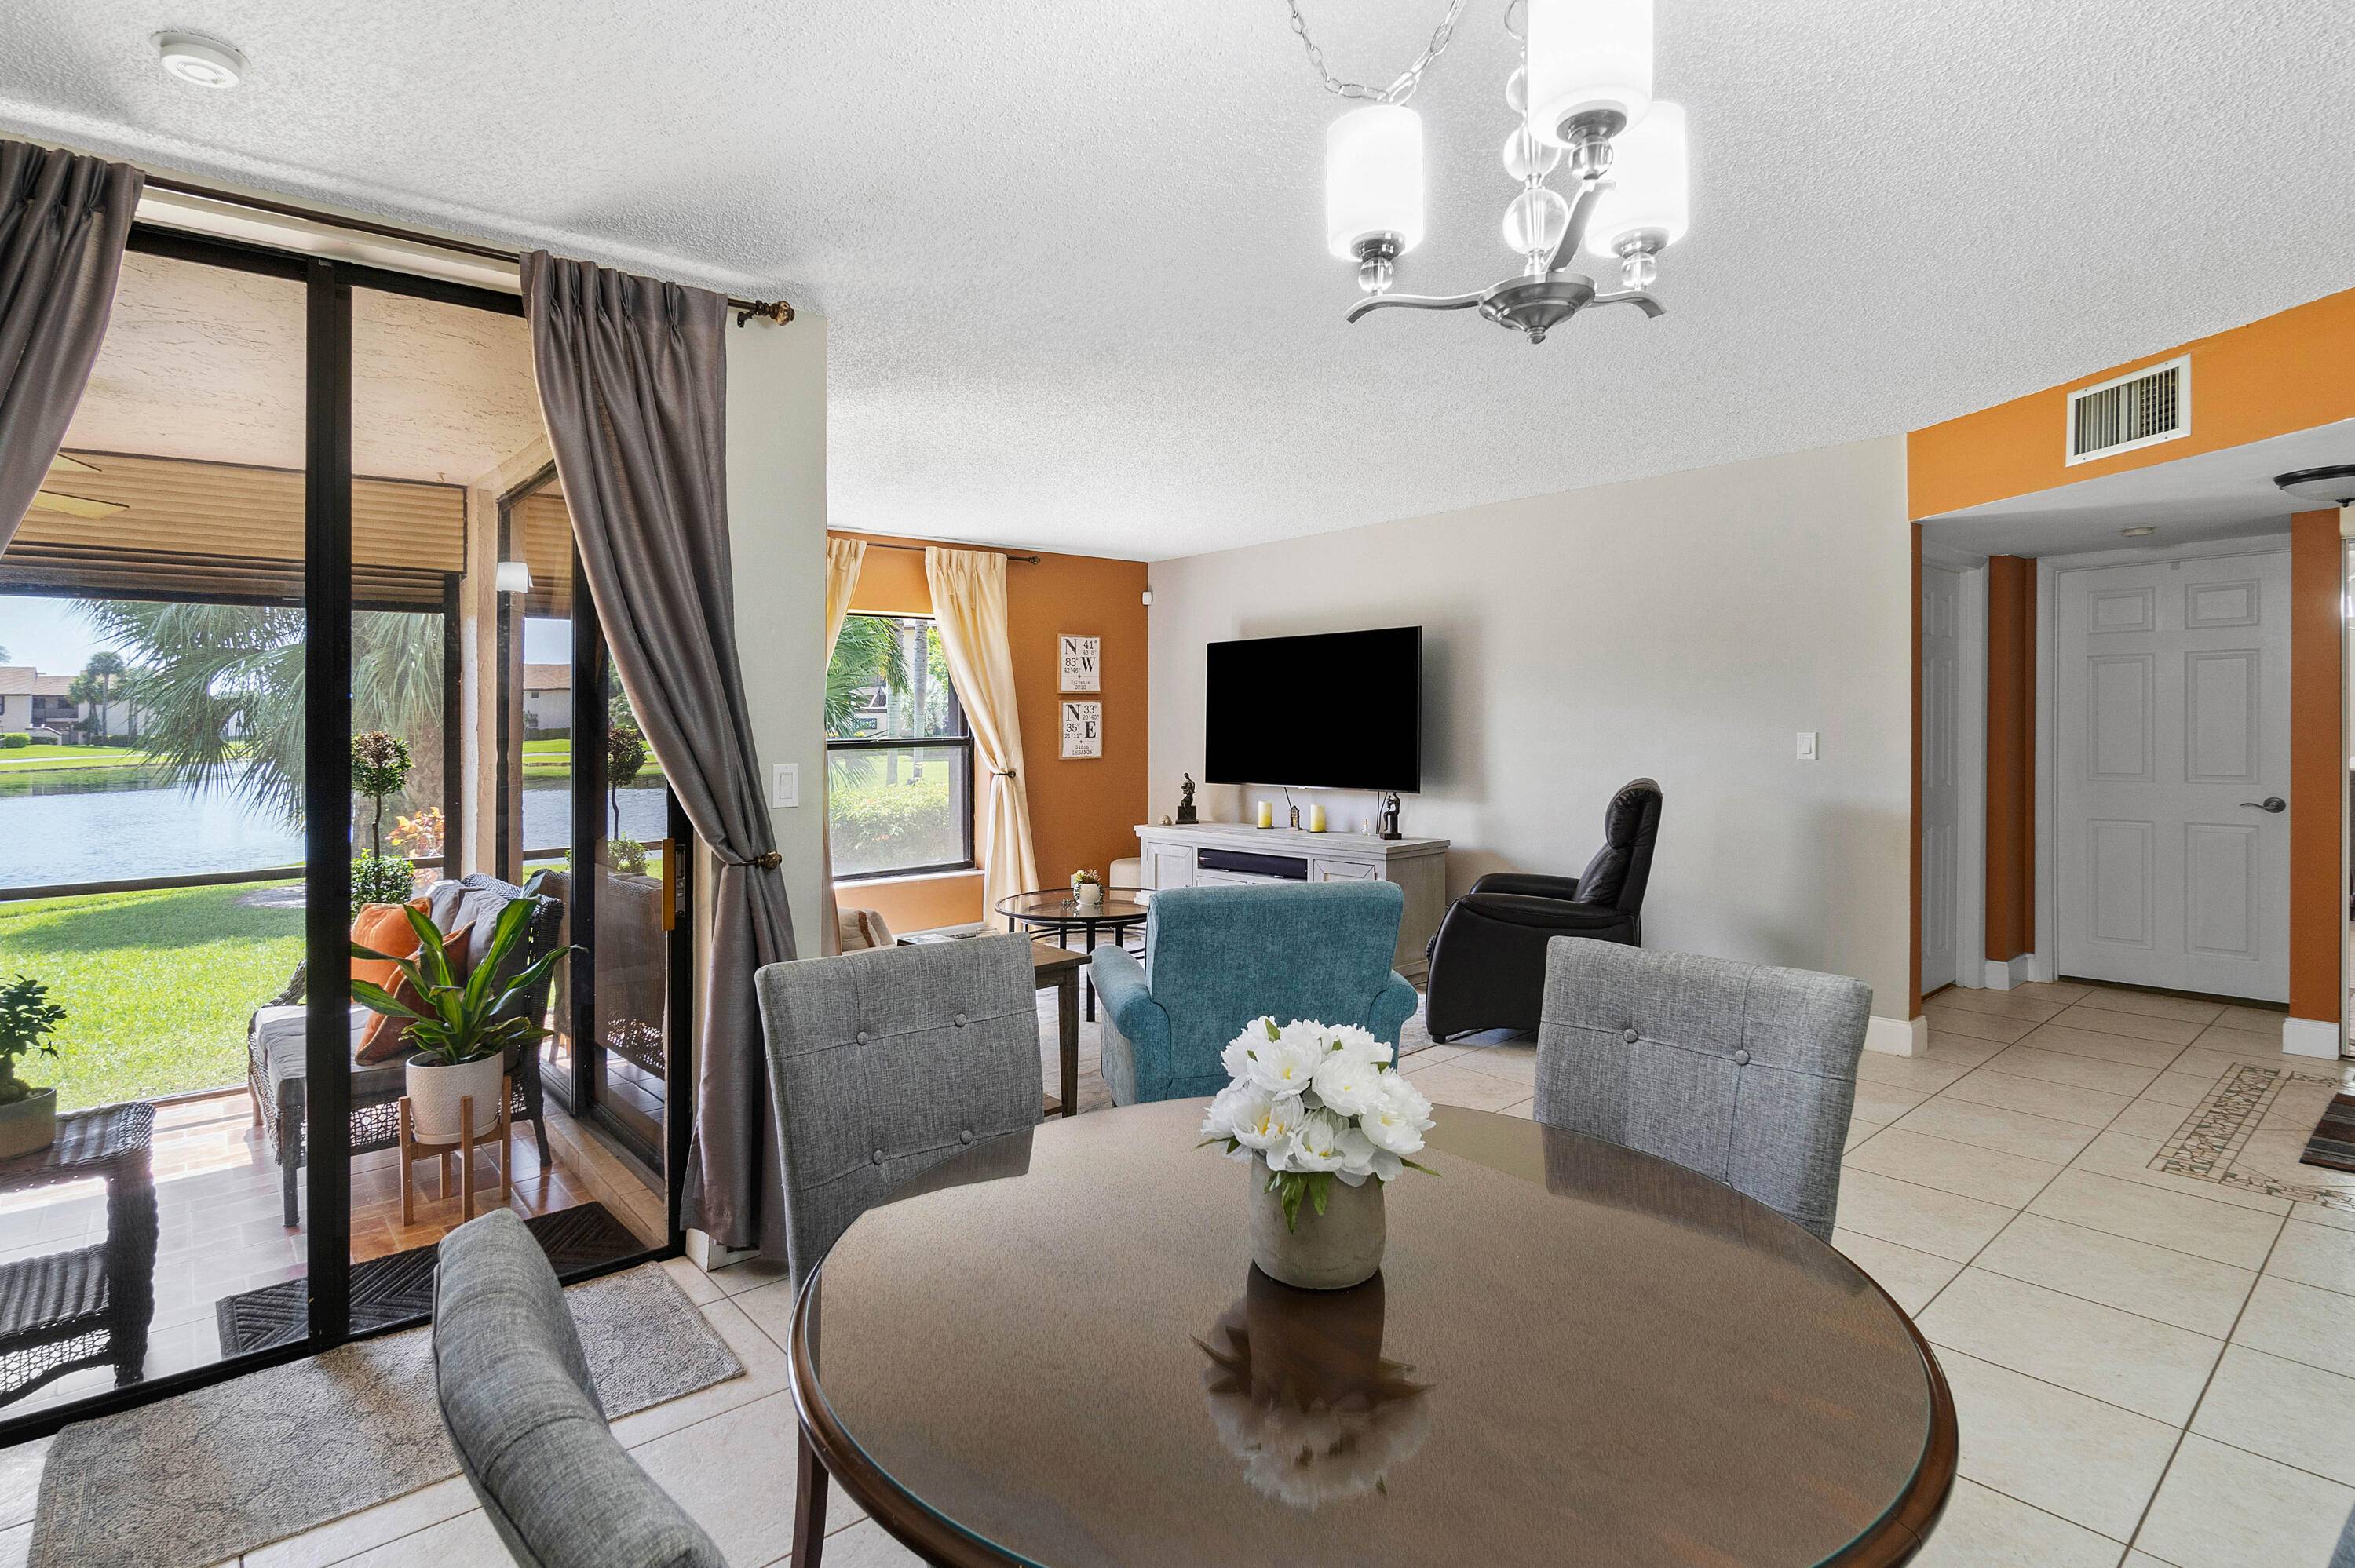 Located in a quaint all ages community of Boca Glades, this spacious 2 bed 2 bath split bedroom ground floor condo comes with a screen in patio overlooking a beautiful ...